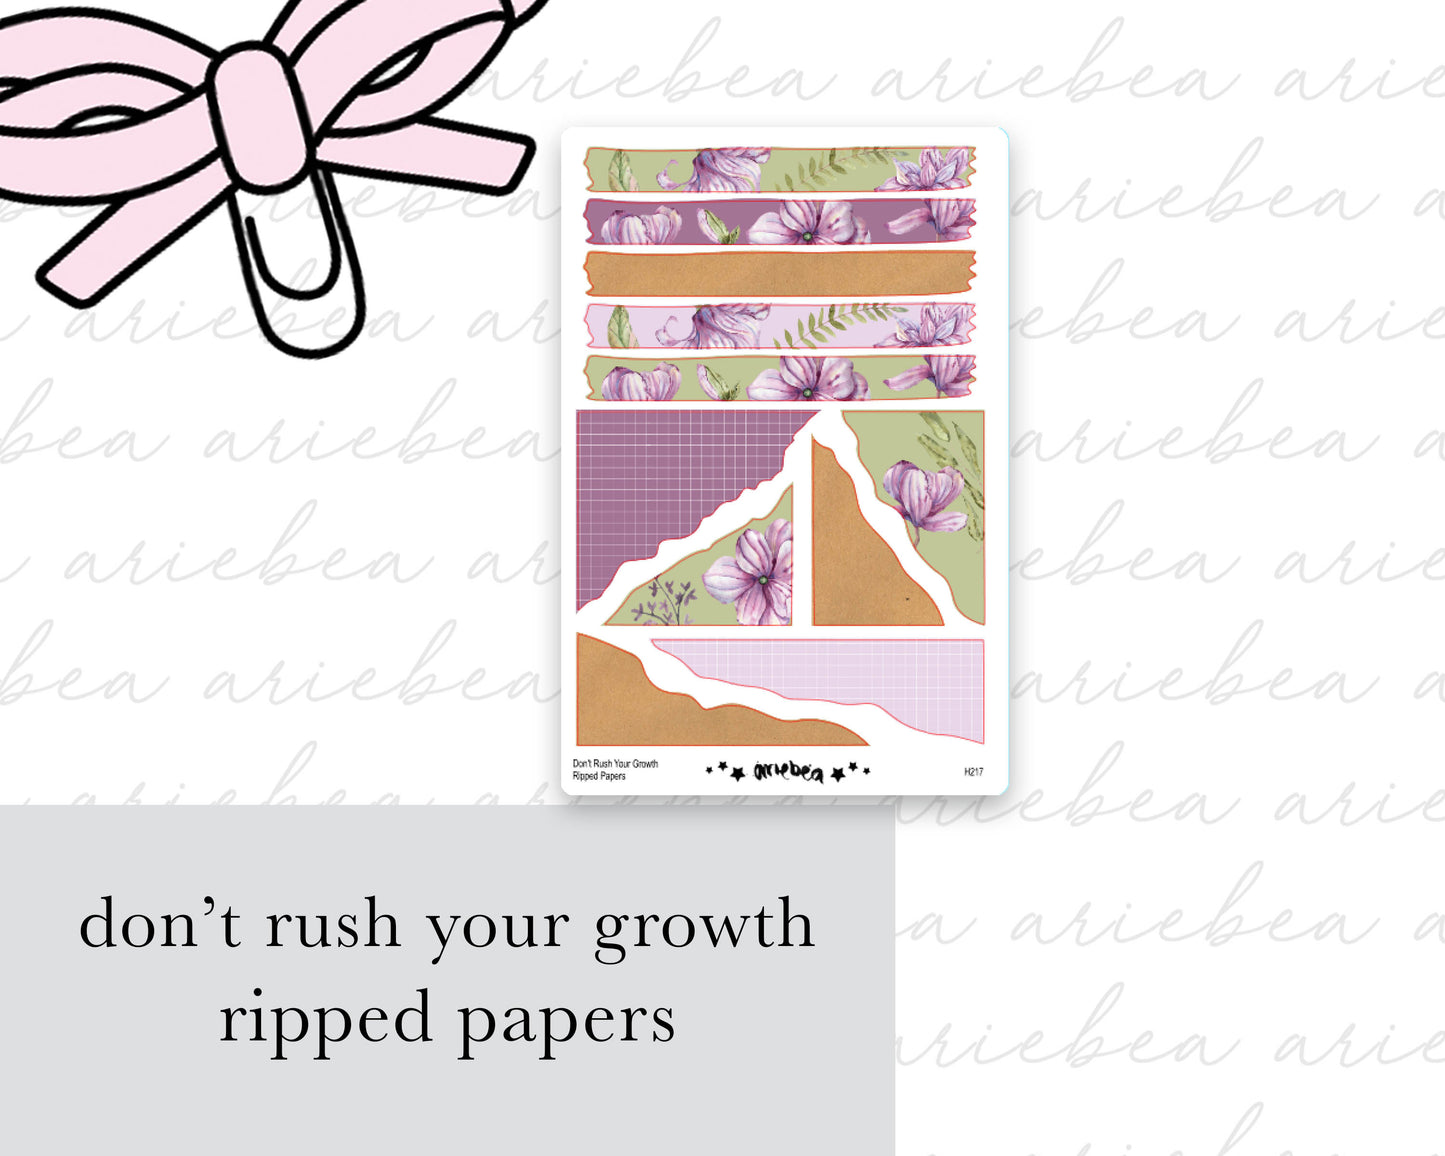 Don't Rush Your Growth Full Mini Kit (4 pages)